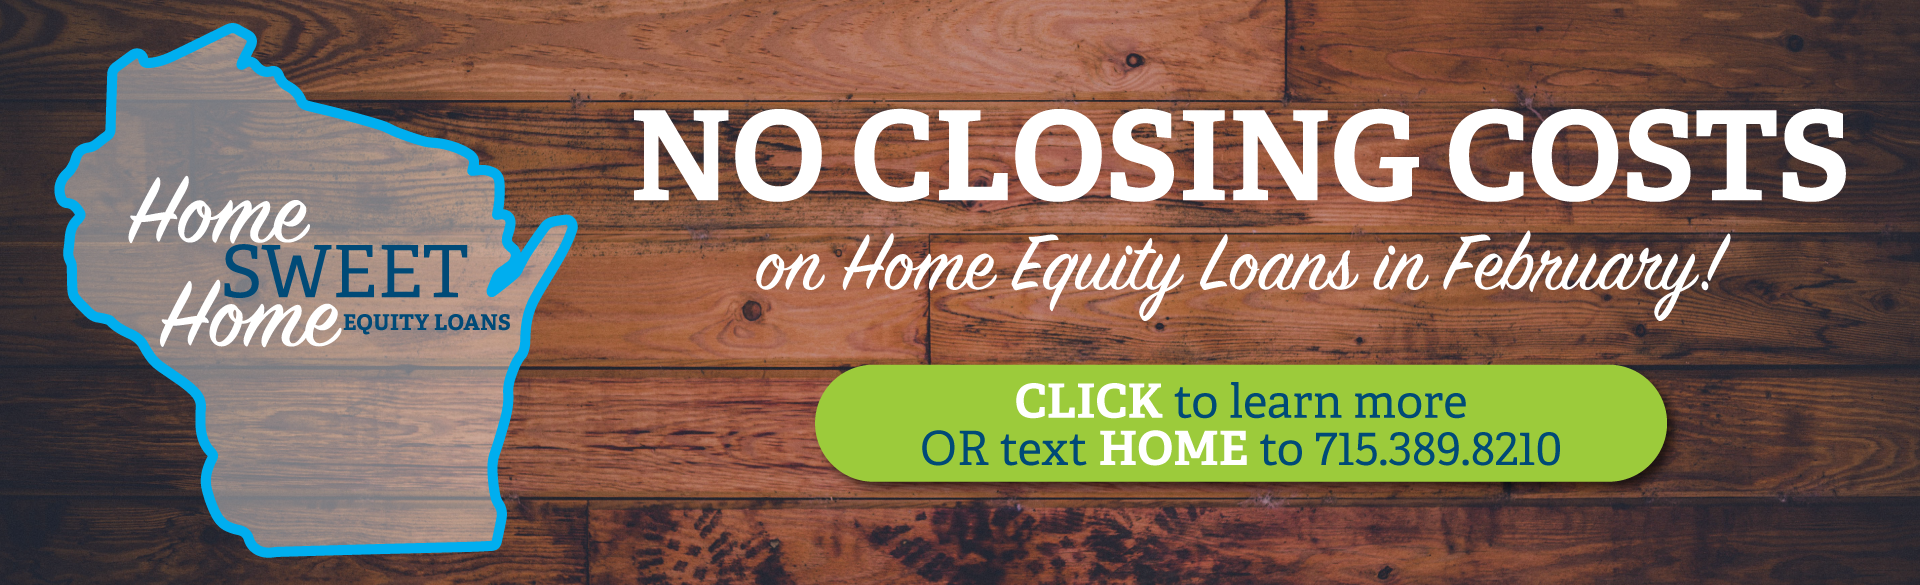 Home Sweet Home Equity Loans